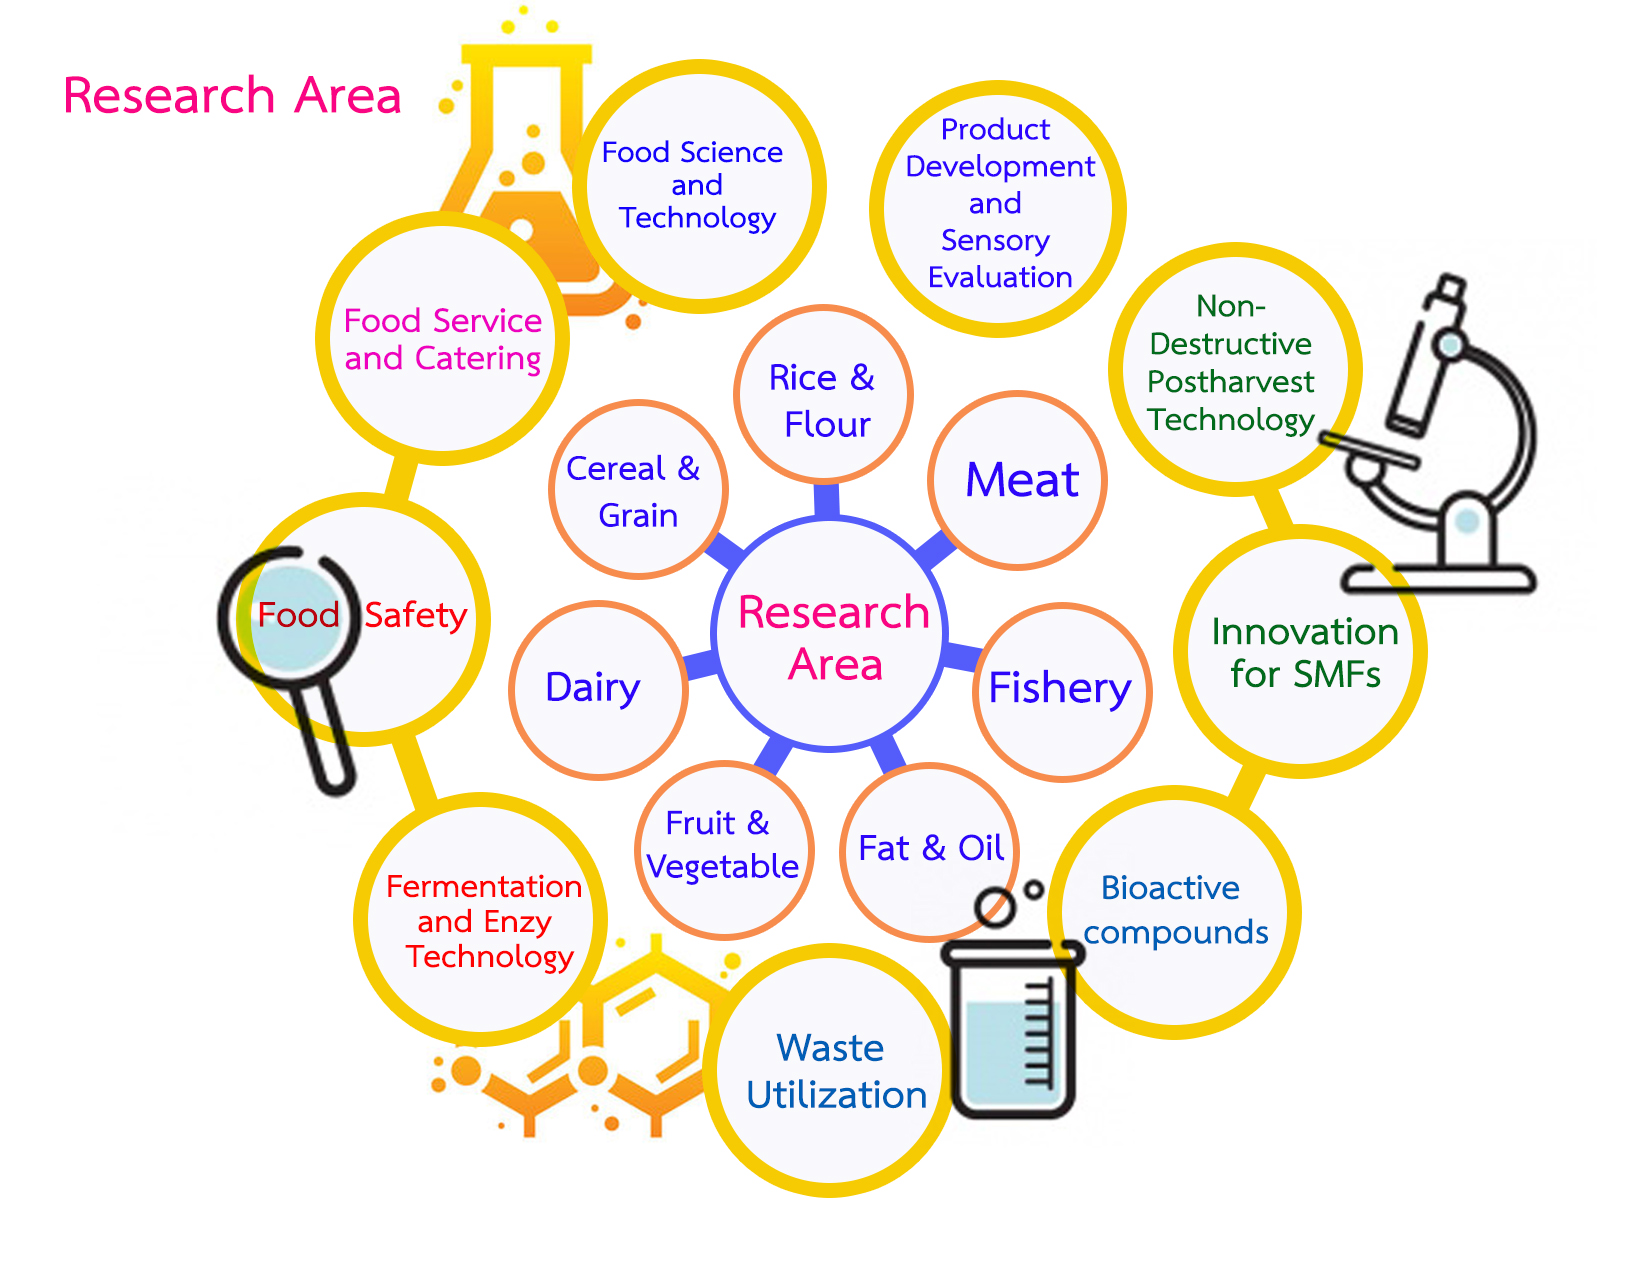 Research area